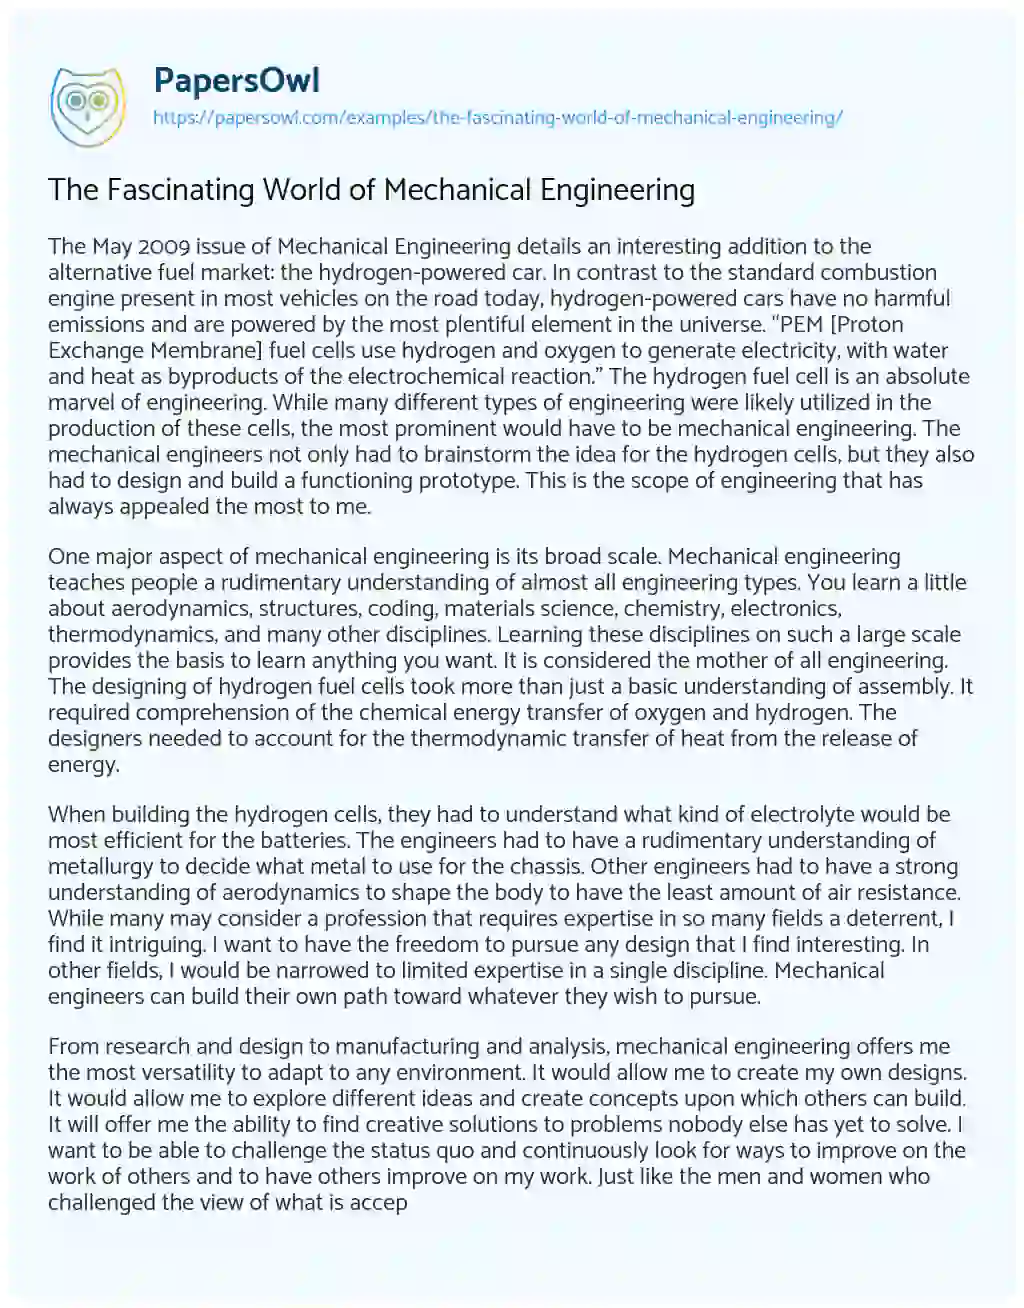 Essay on The Fascinating World of Mechanical Engineering